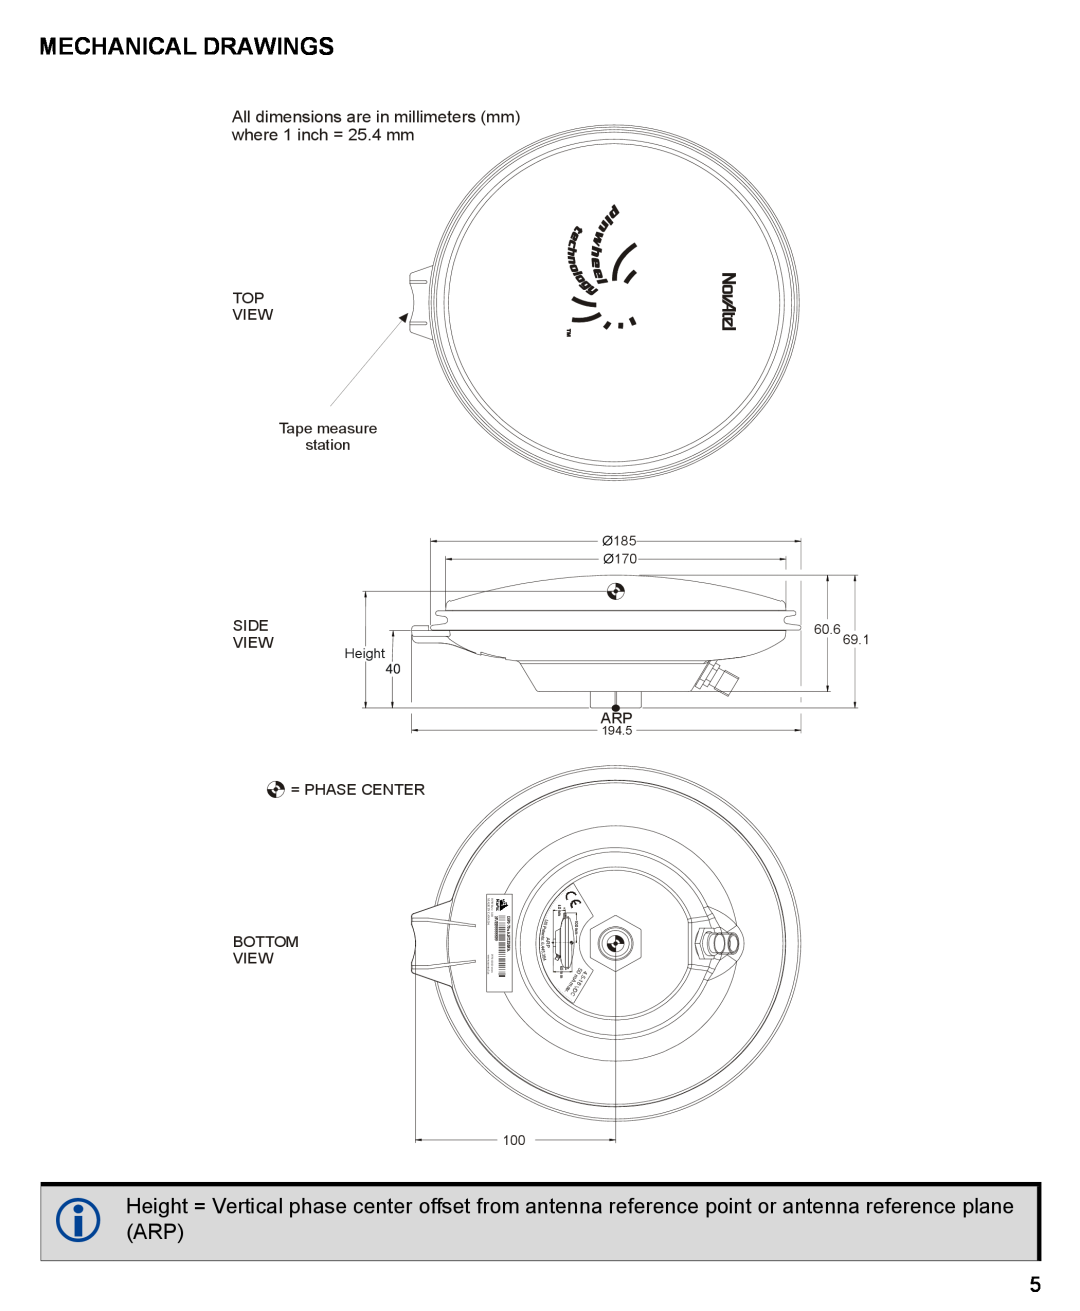 Novatel GPS-703-GGG Mechanical Drawings, TOP VIEW Tape measure station, Side View, = Phase Center, Bottom View, Height 